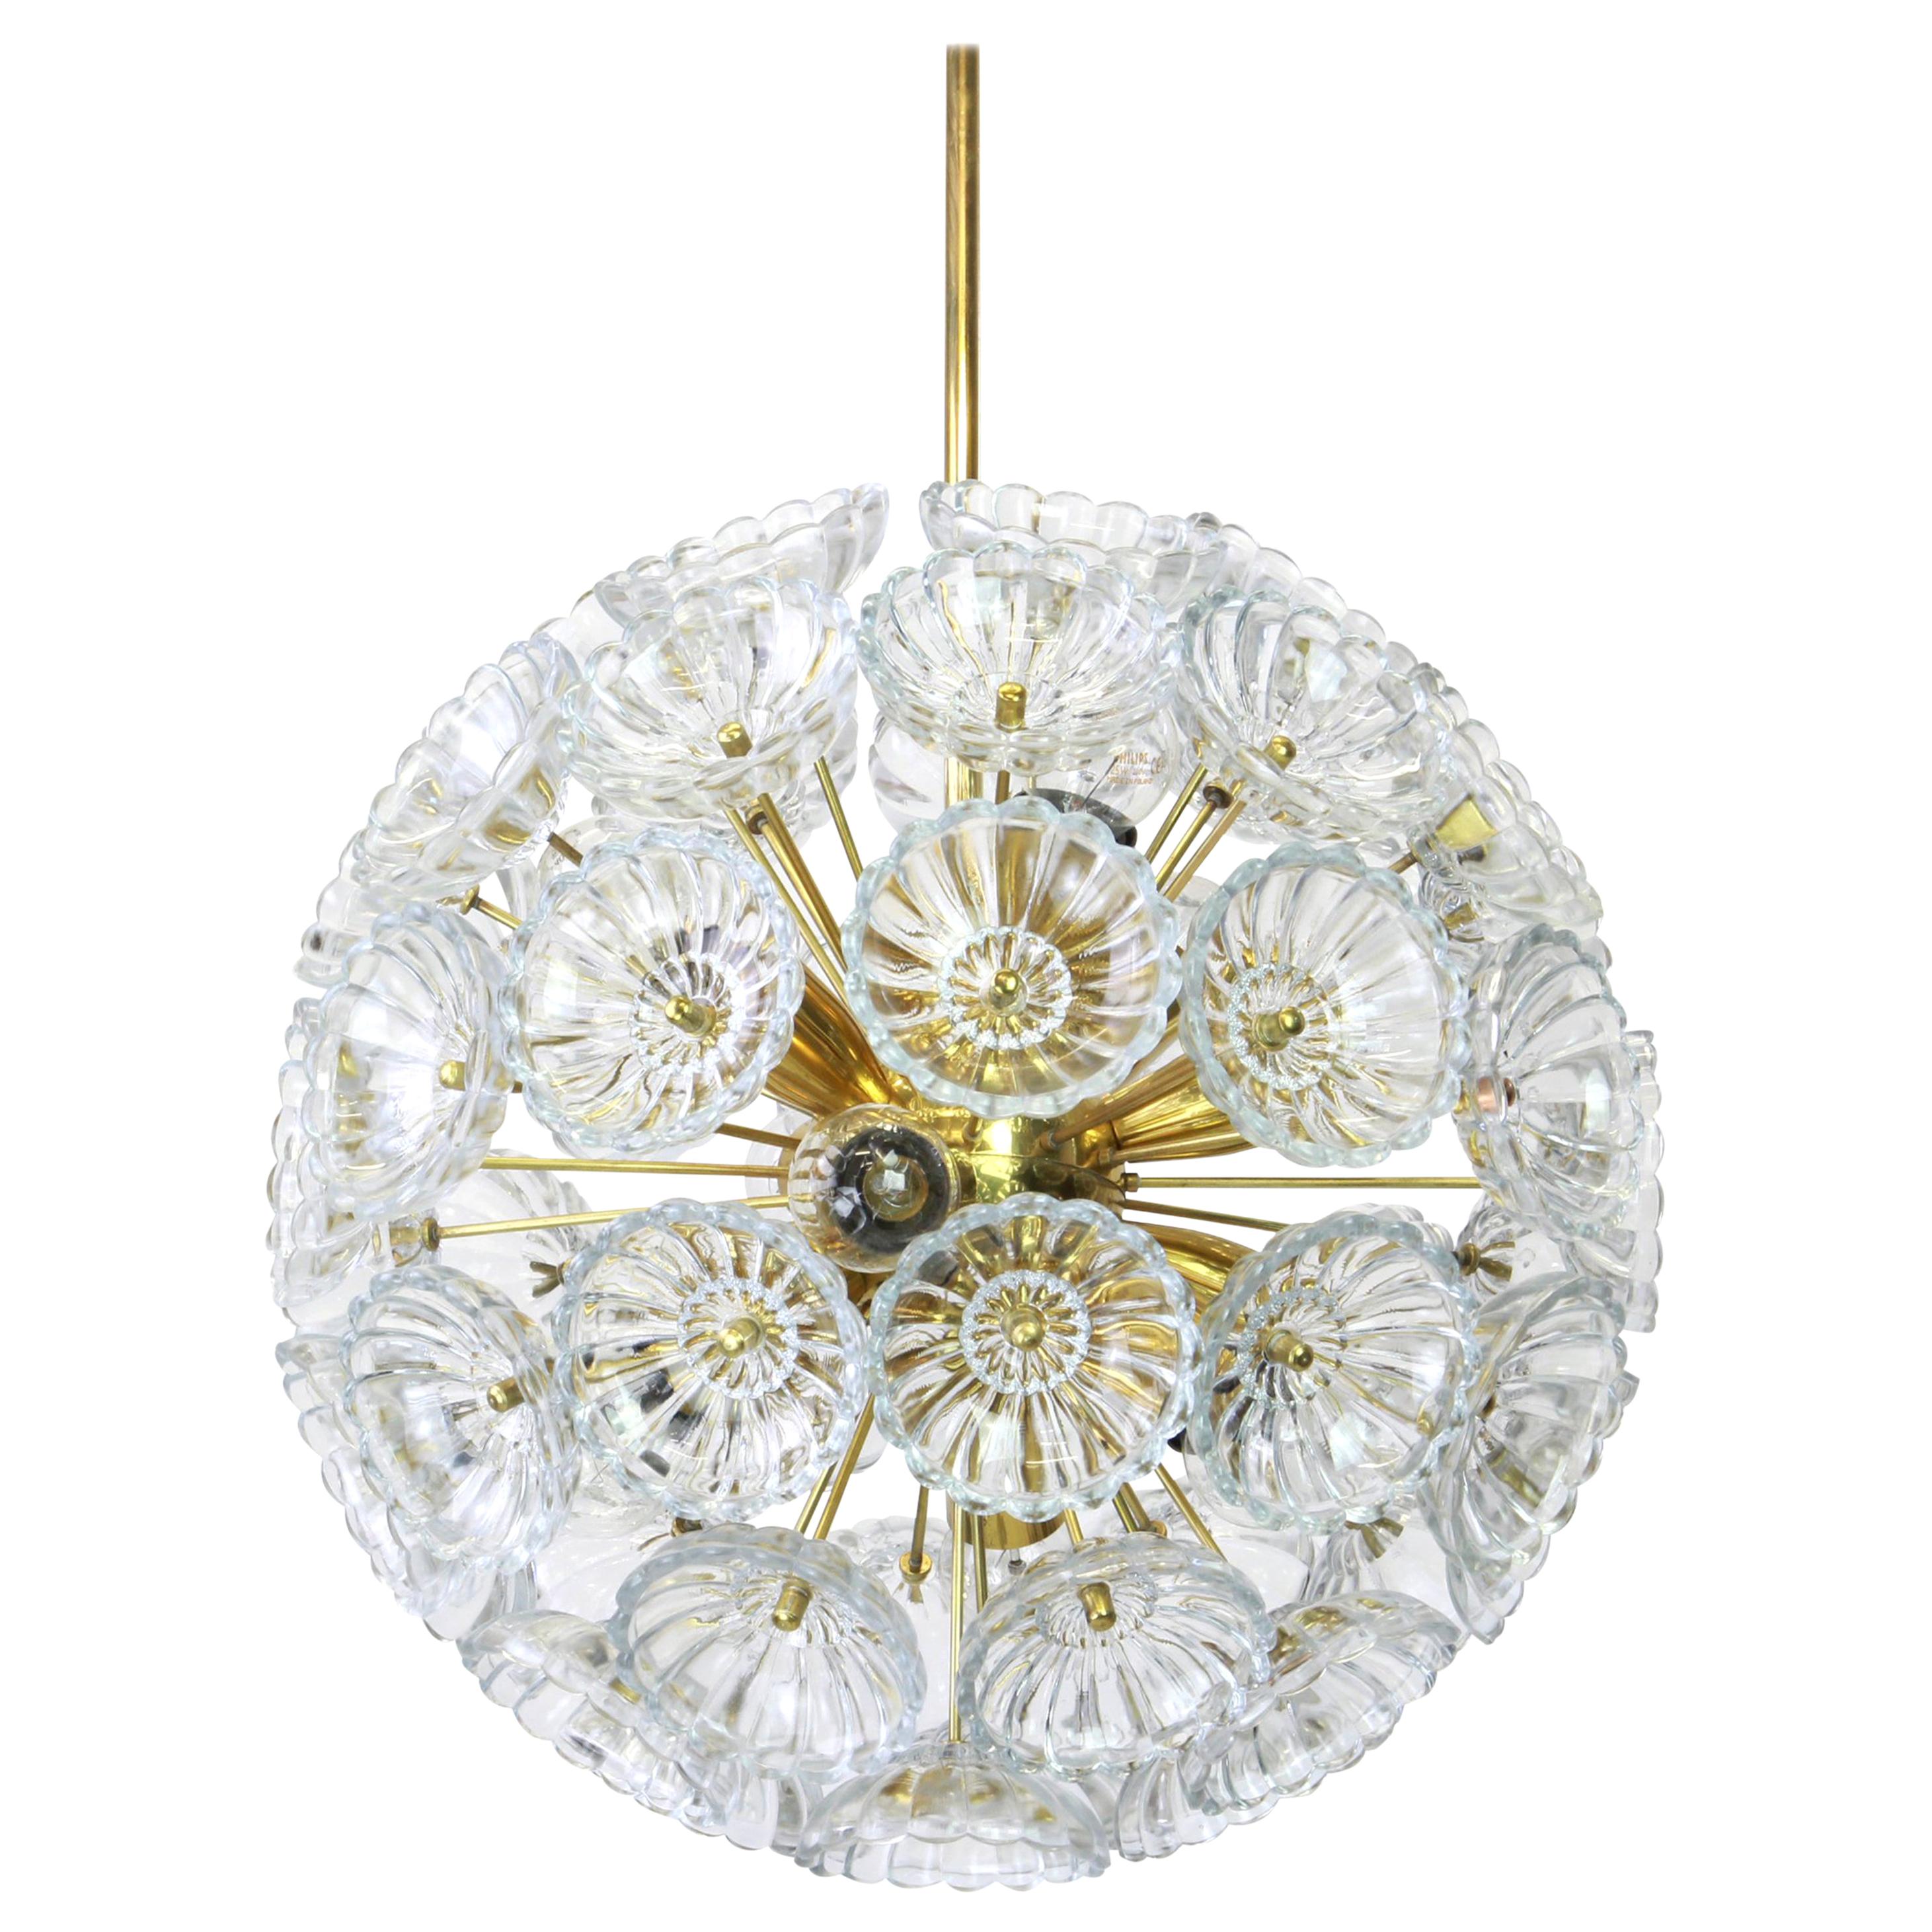 1 of 2 Stunning Floral Glass and Brass Sputnik Chandeliers, Germany, 1960s For Sale